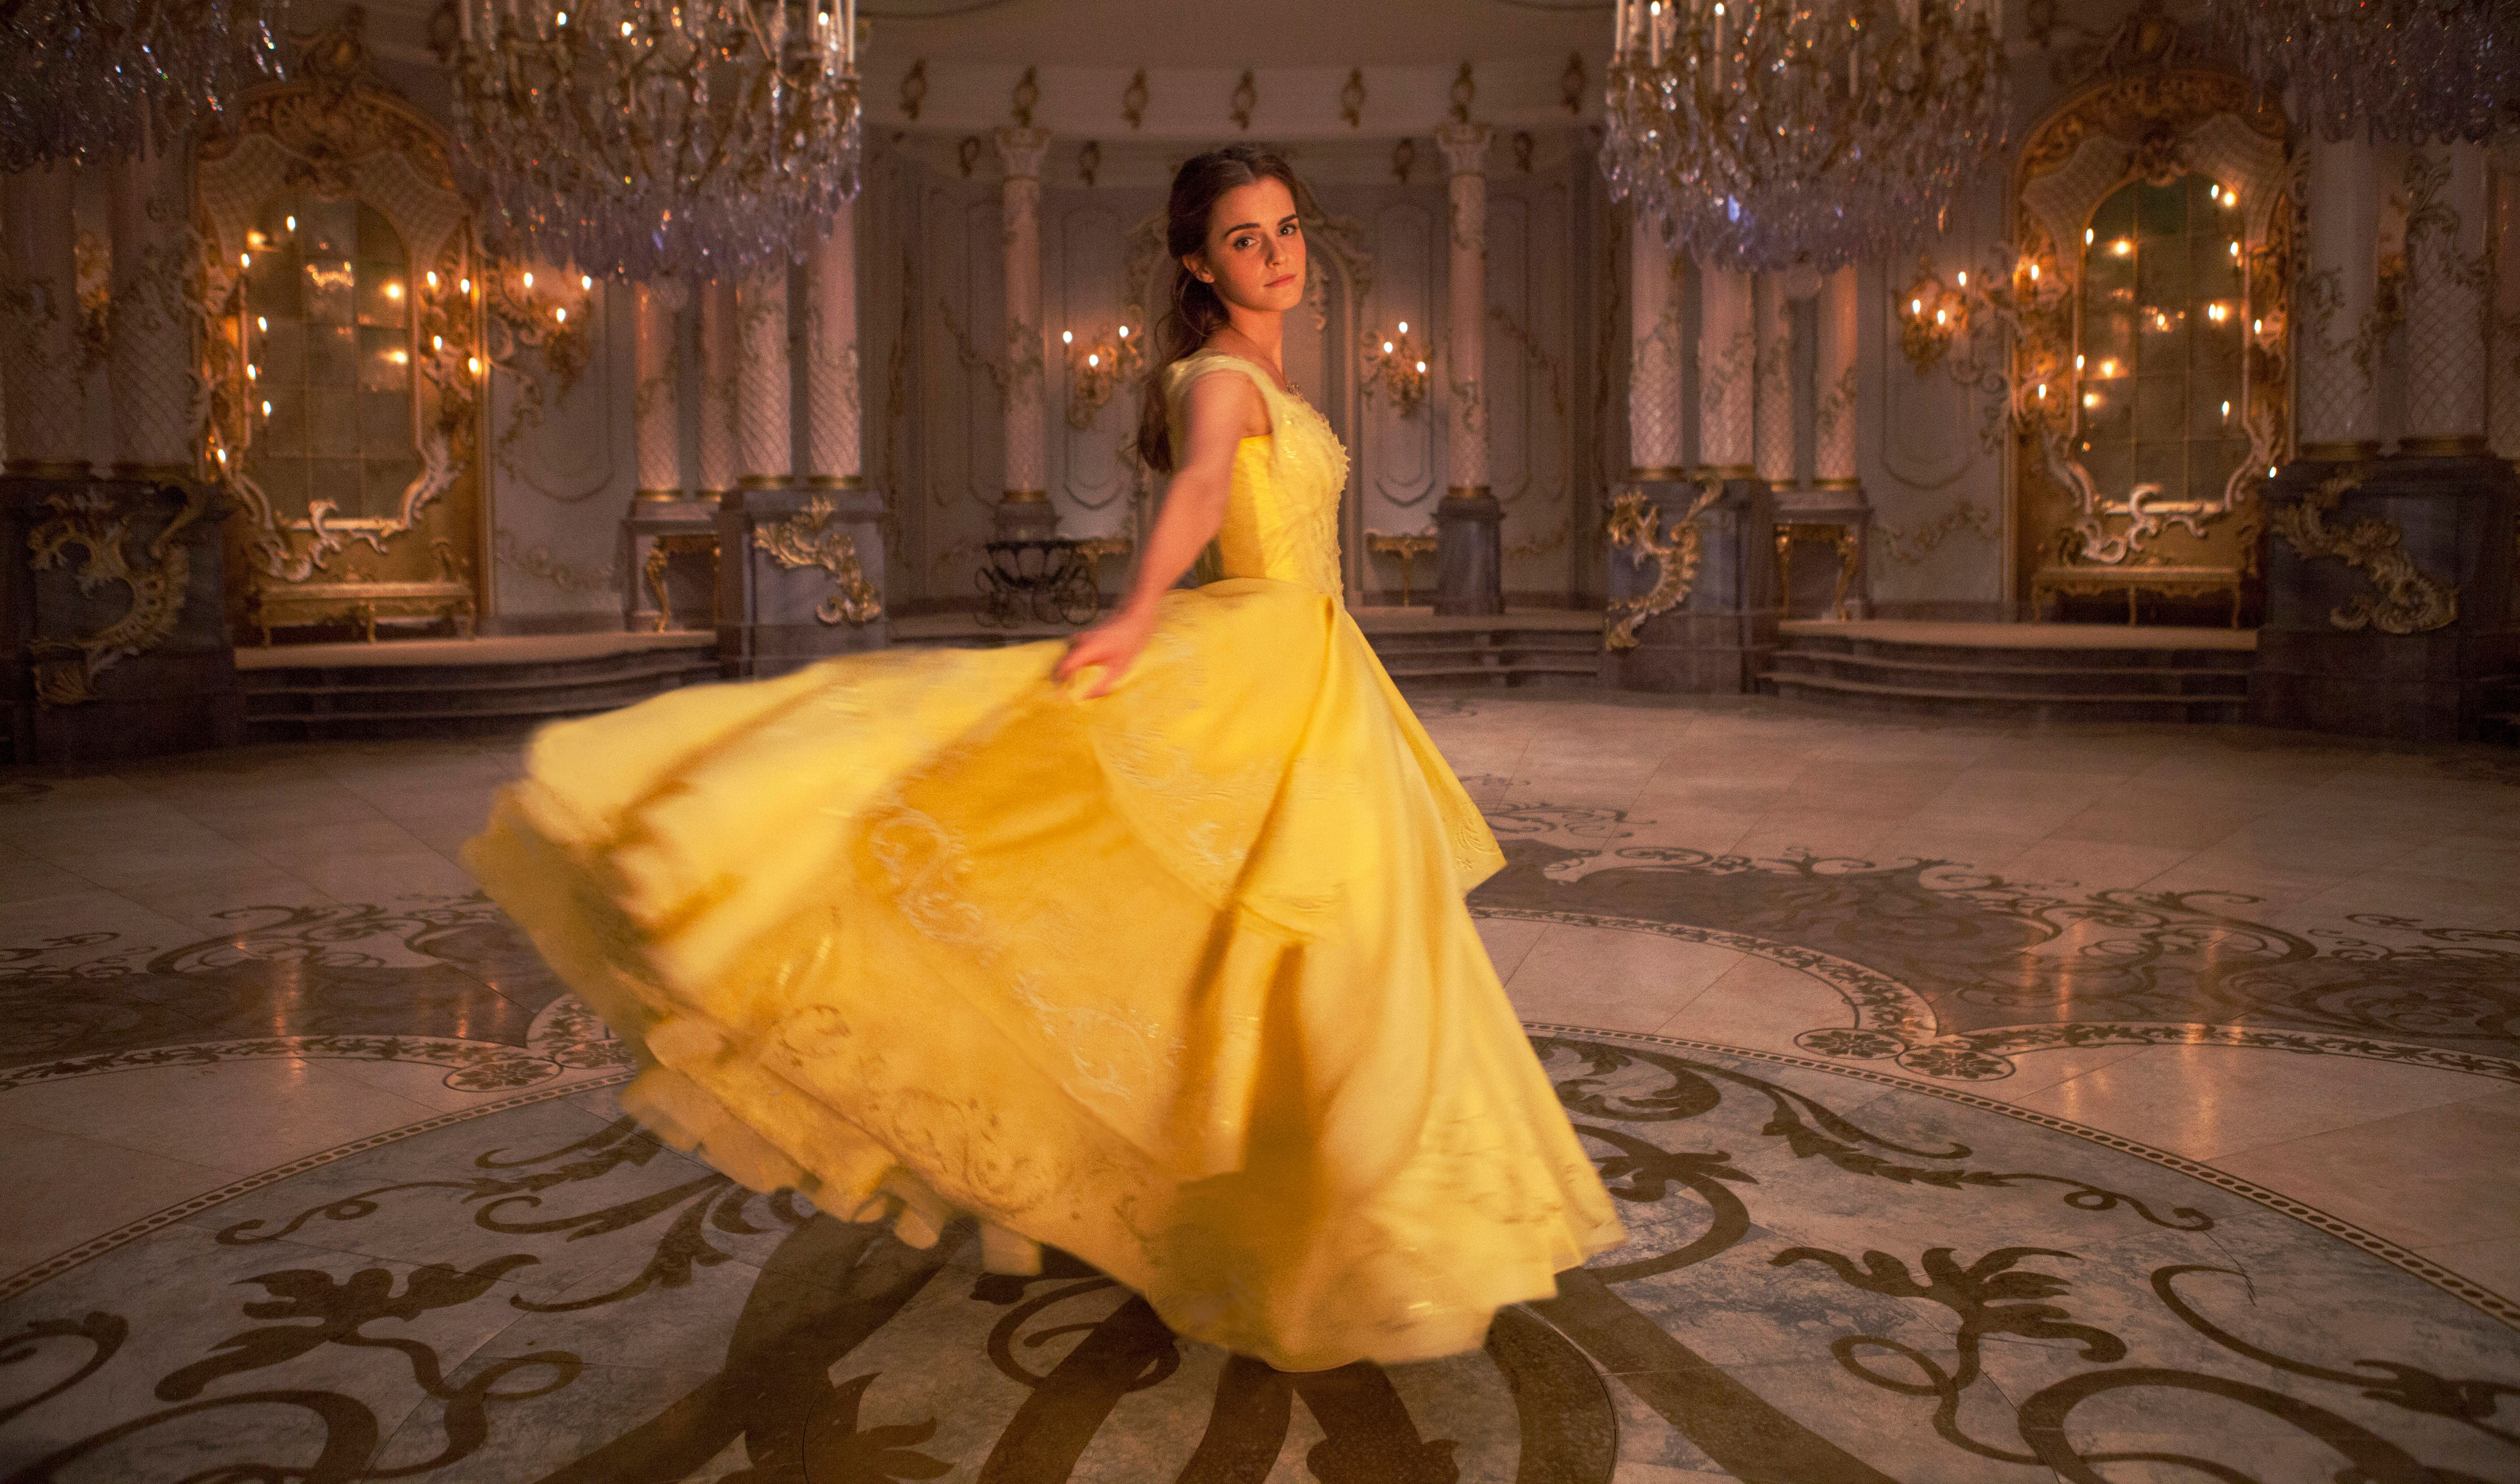 beauty-and-the-beast-movie-image-belle-emma-watson